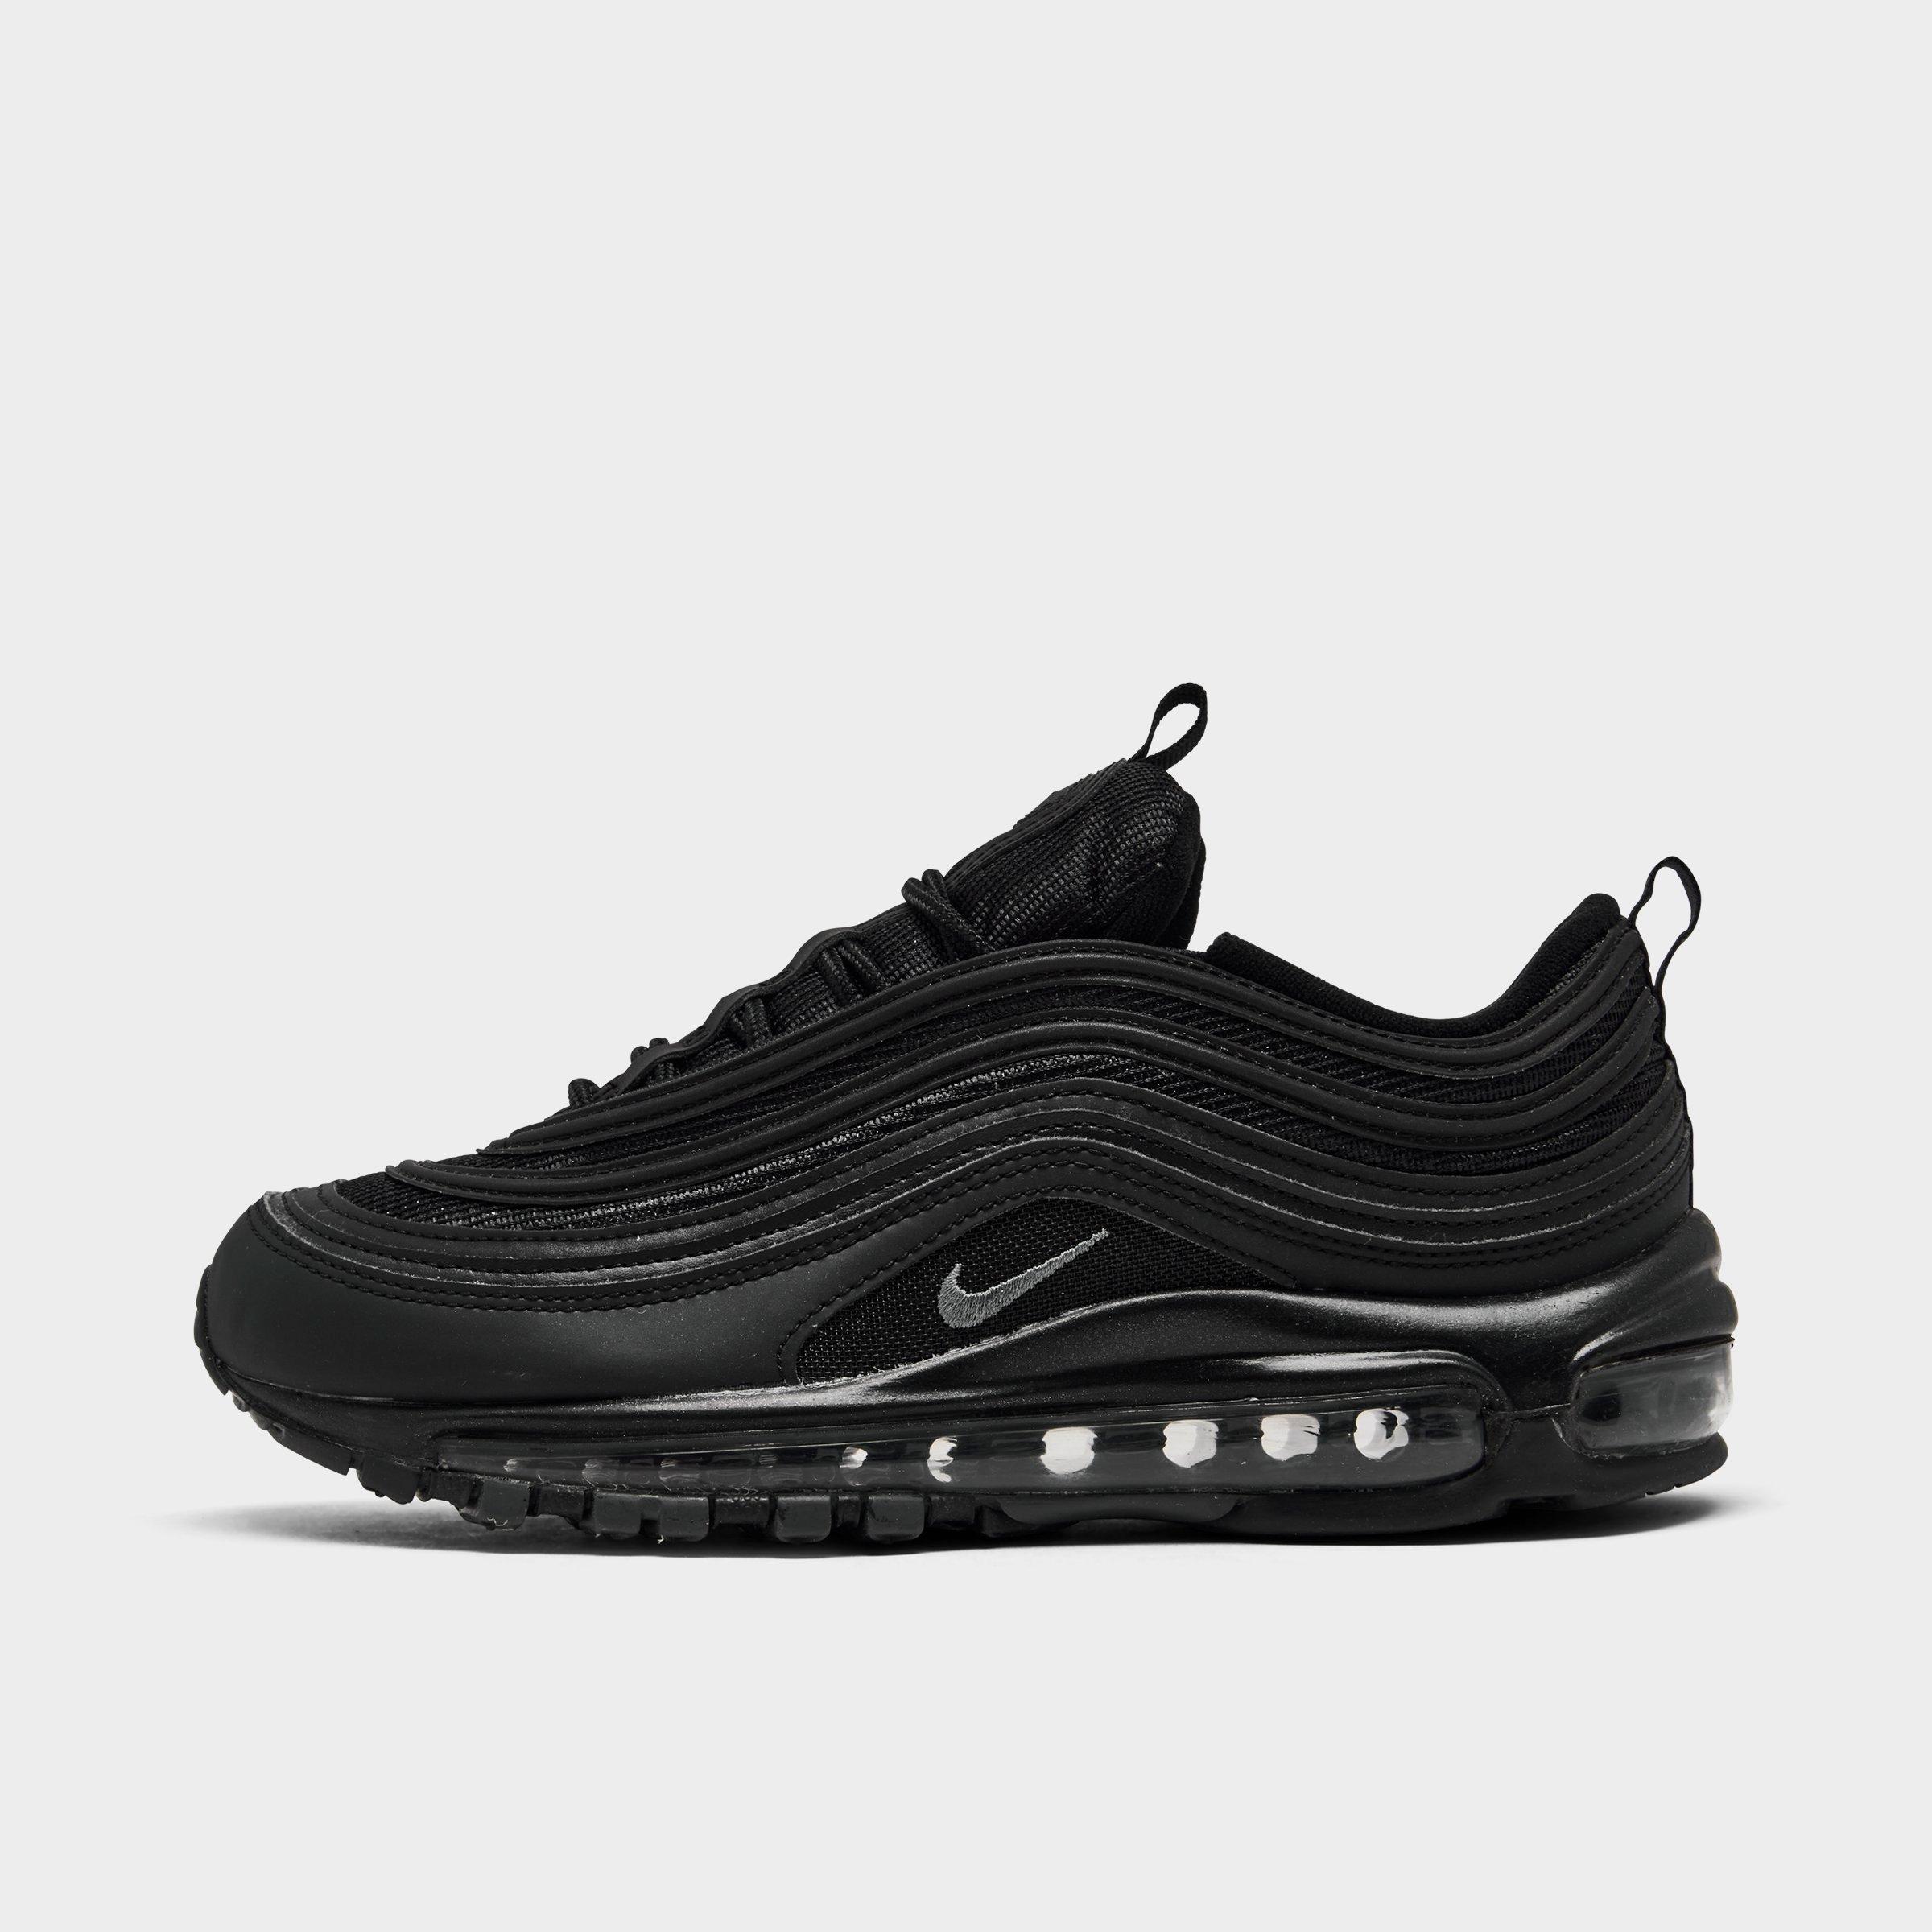 Nike Air Max 97 Shoes \u0026 Sneakers | Finish Line